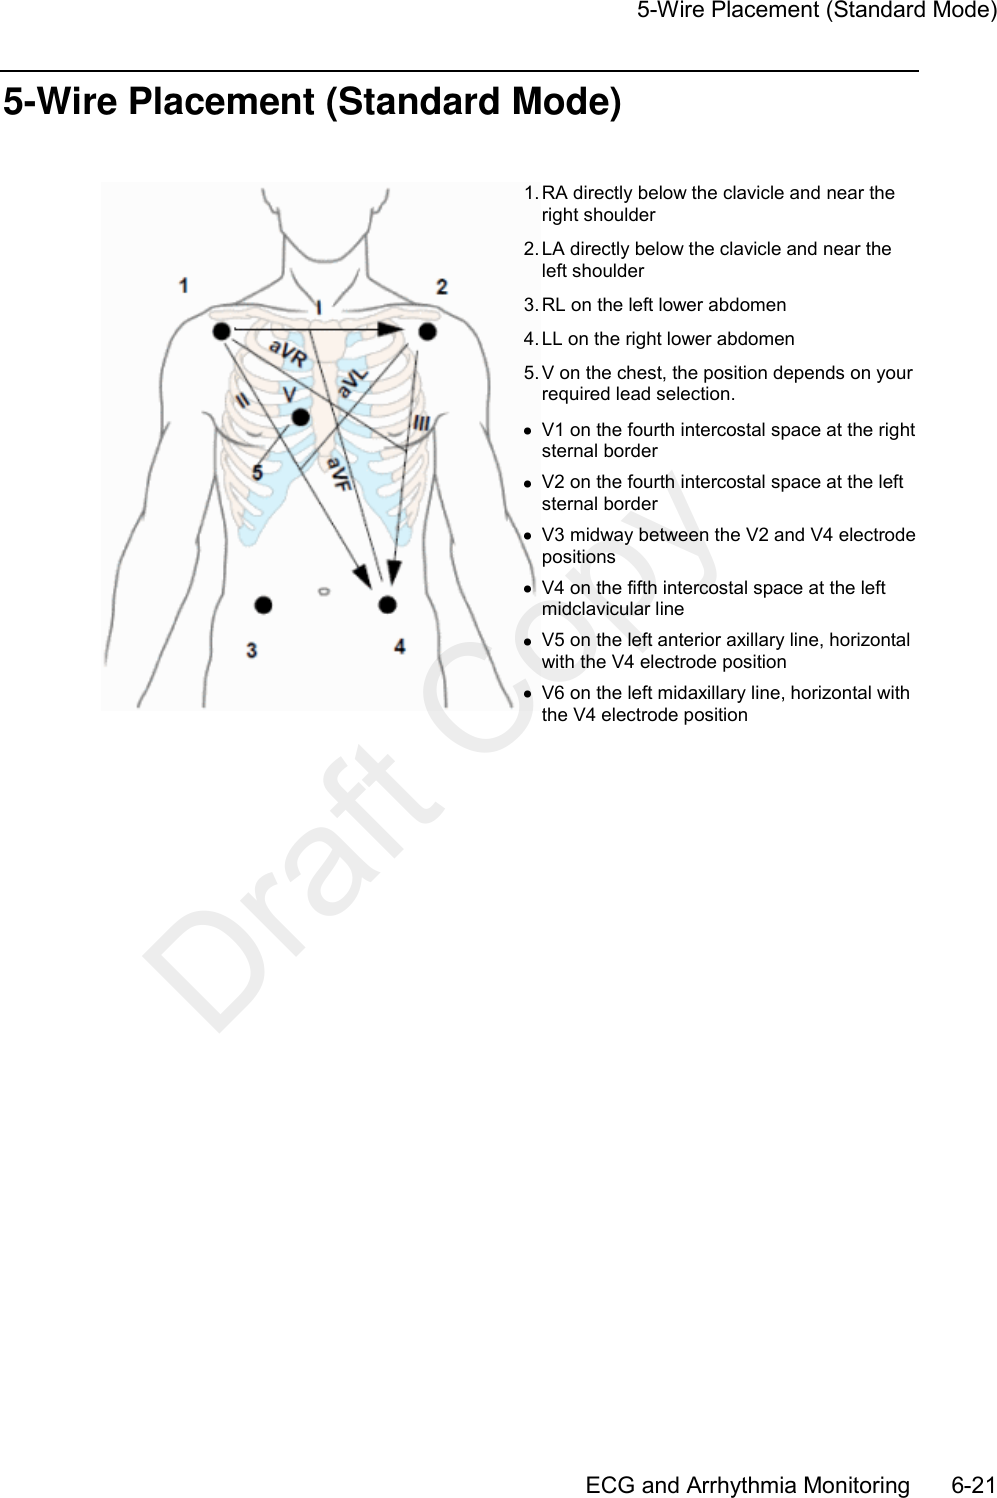     5-Wire Placement (Standard Mode)       ECG and Arrhythmia Monitoring      6-21 5-Wire Placement (Standard Mode)   1. RA directly below the clavicle and near the right shoulder 2. LA directly below the clavicle and near the left shoulder 3. RL on the left lower abdomen 4. LL on the right lower abdomen 5. V on the chest, the position depends on your required lead selection.   V1 on the fourth intercostal space at the right sternal border   V2 on the fourth intercostal space at the left sternal border   V3 midway between the V2 and V4 electrode positions   V4 on the fifth intercostal space at the left midclavicular line   V5 on the left anterior axillary line, horizontal with the V4 electrode position   V6 on the left midaxillary line, horizontal with the V4 electrode position   Draft Copy